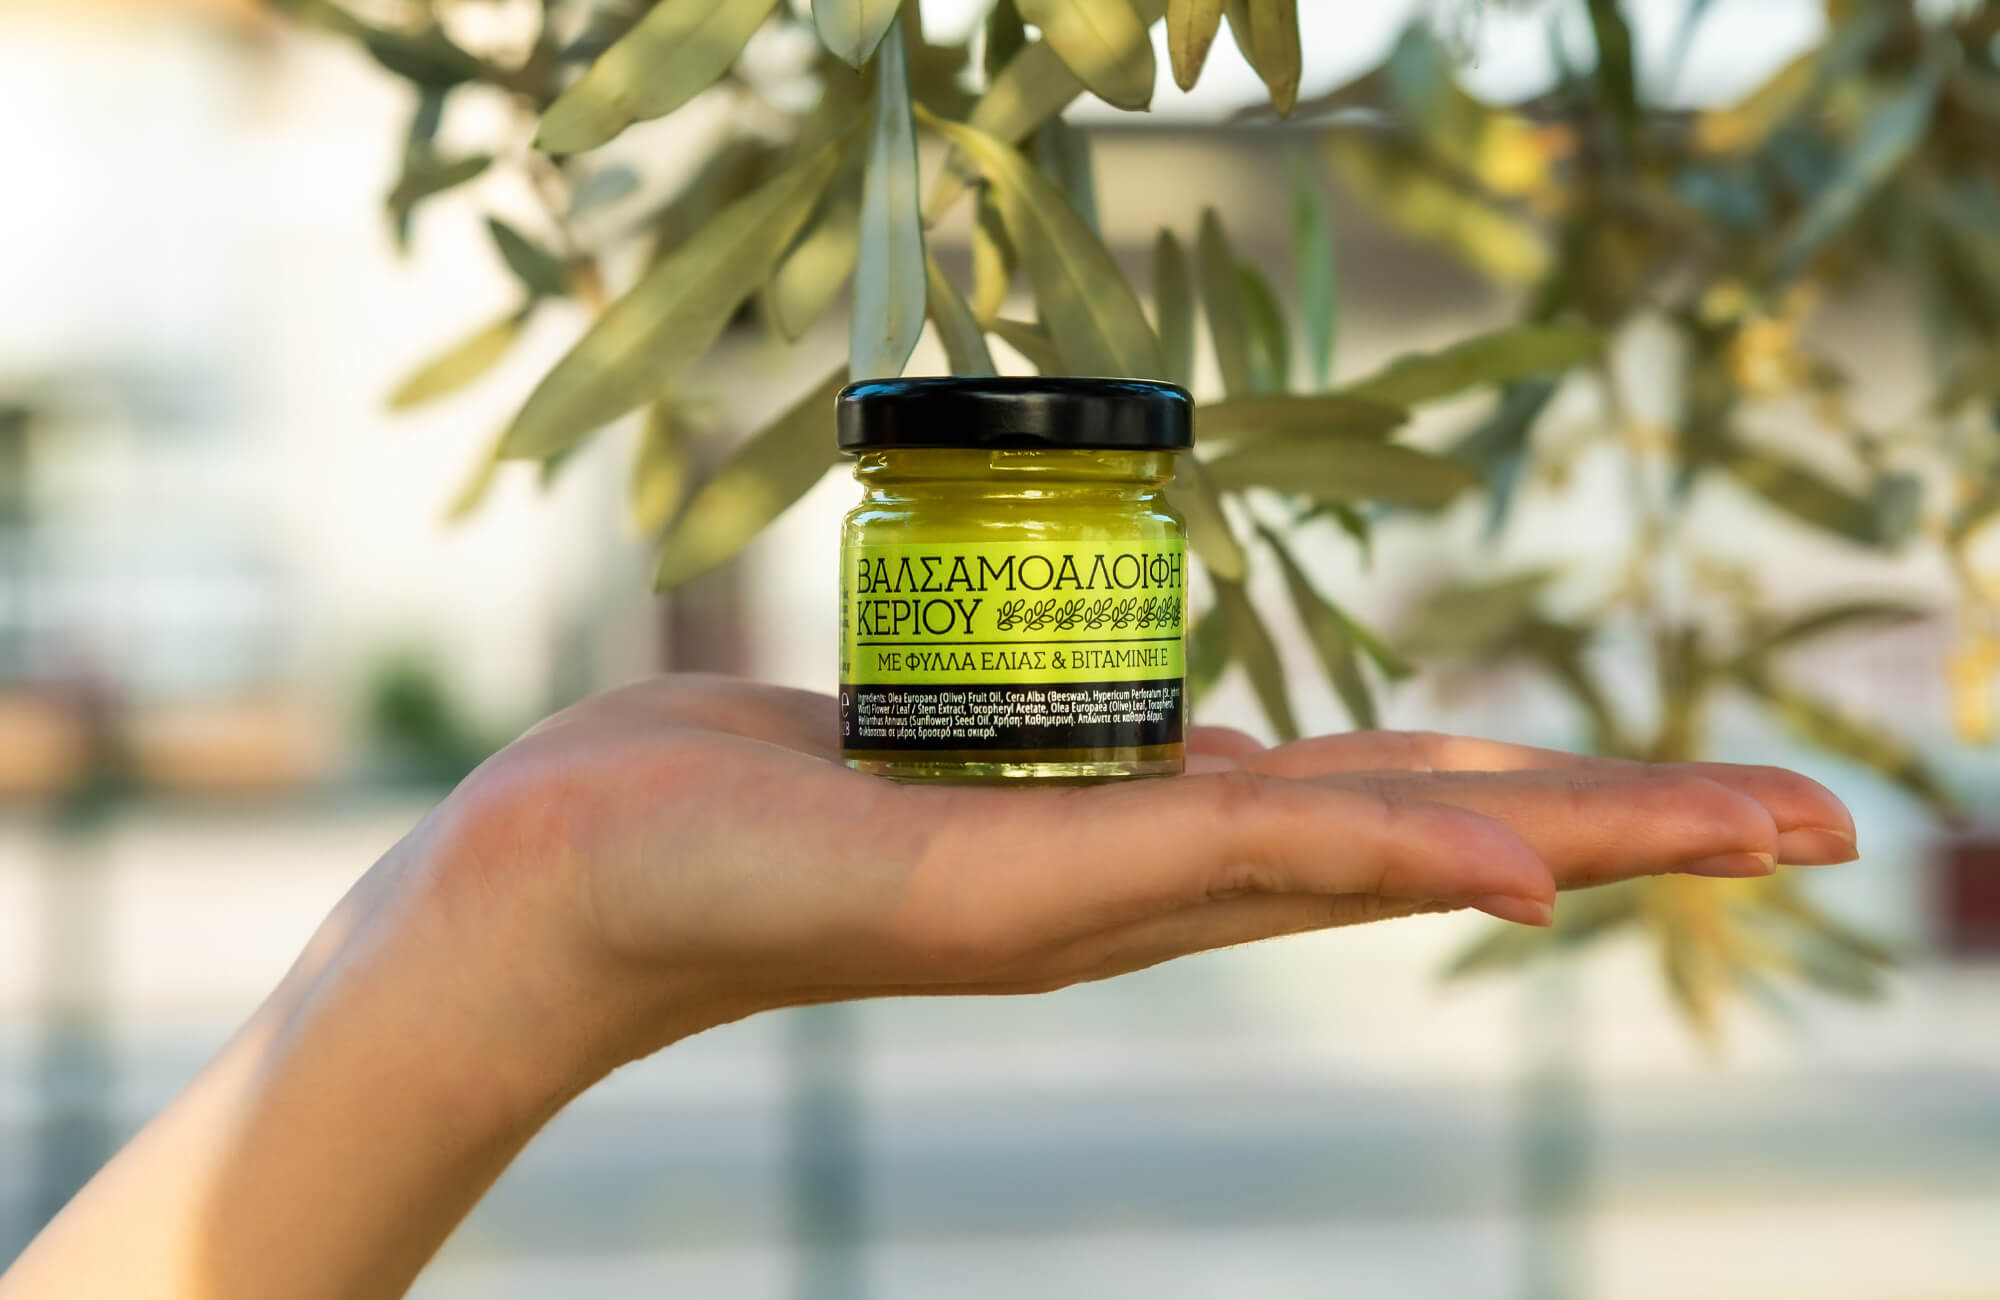 St. John’s wort oil wax cream olive leaves vitamin E natural cosmetics 100 made in Greece parabens sls